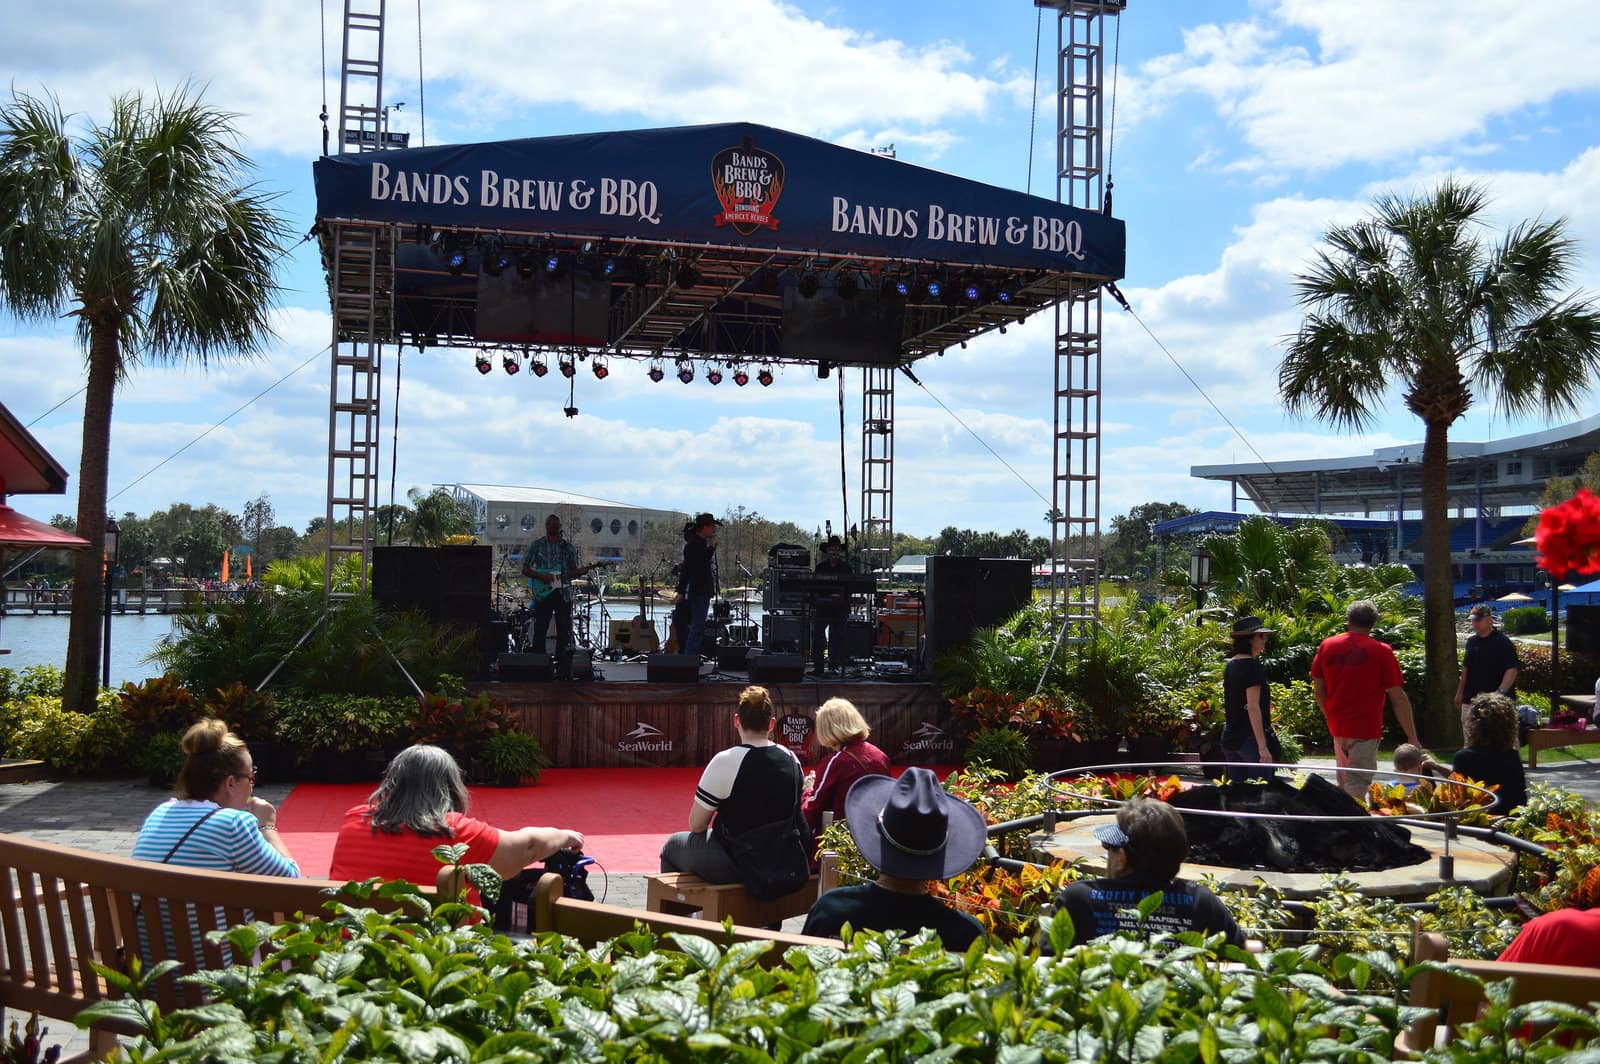 6 reasons you must visit SeaWorld's Bands, Brews, and BBQ